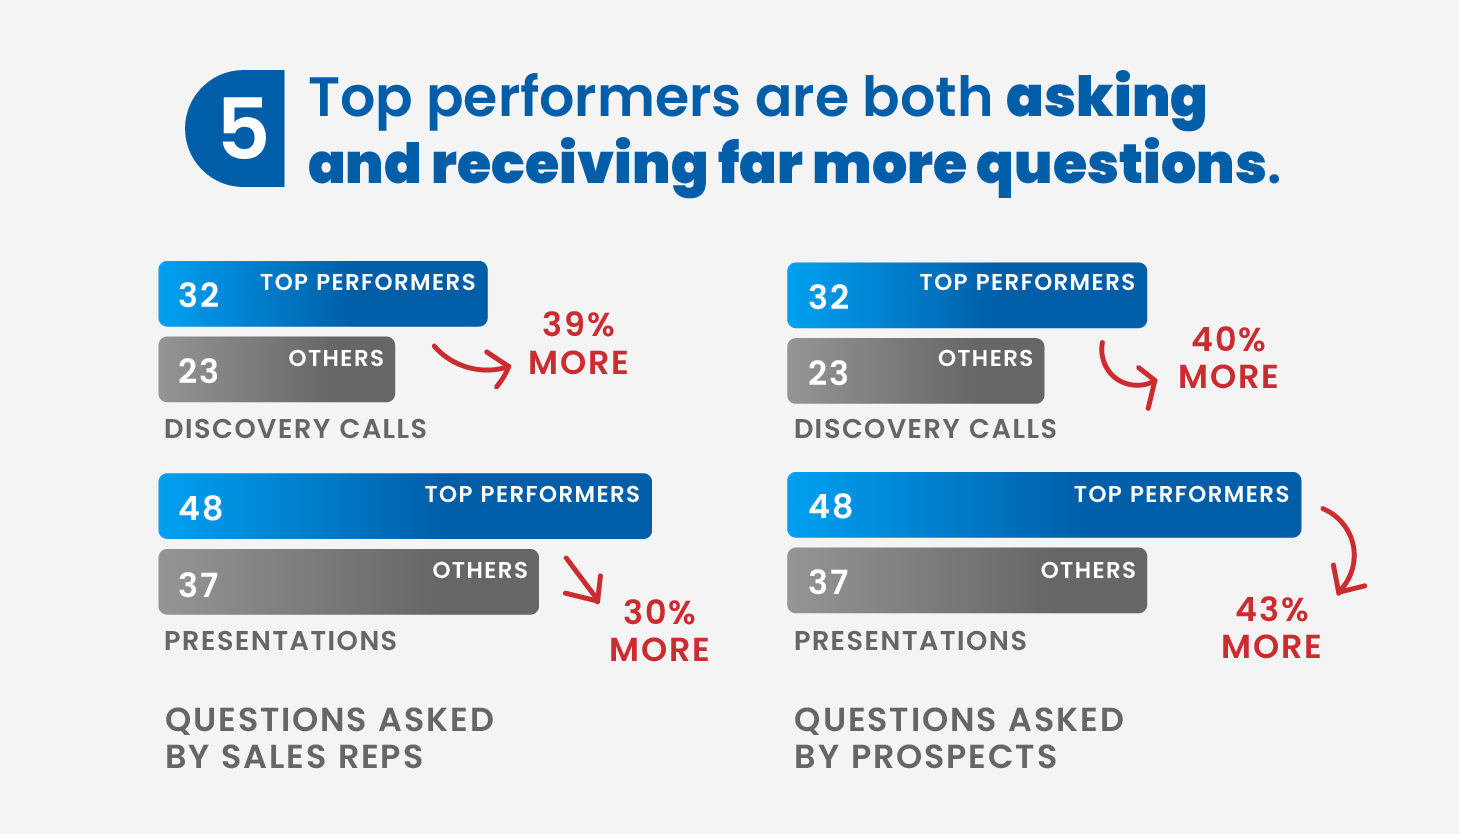 5. Top performers are both asking and receiving more questions